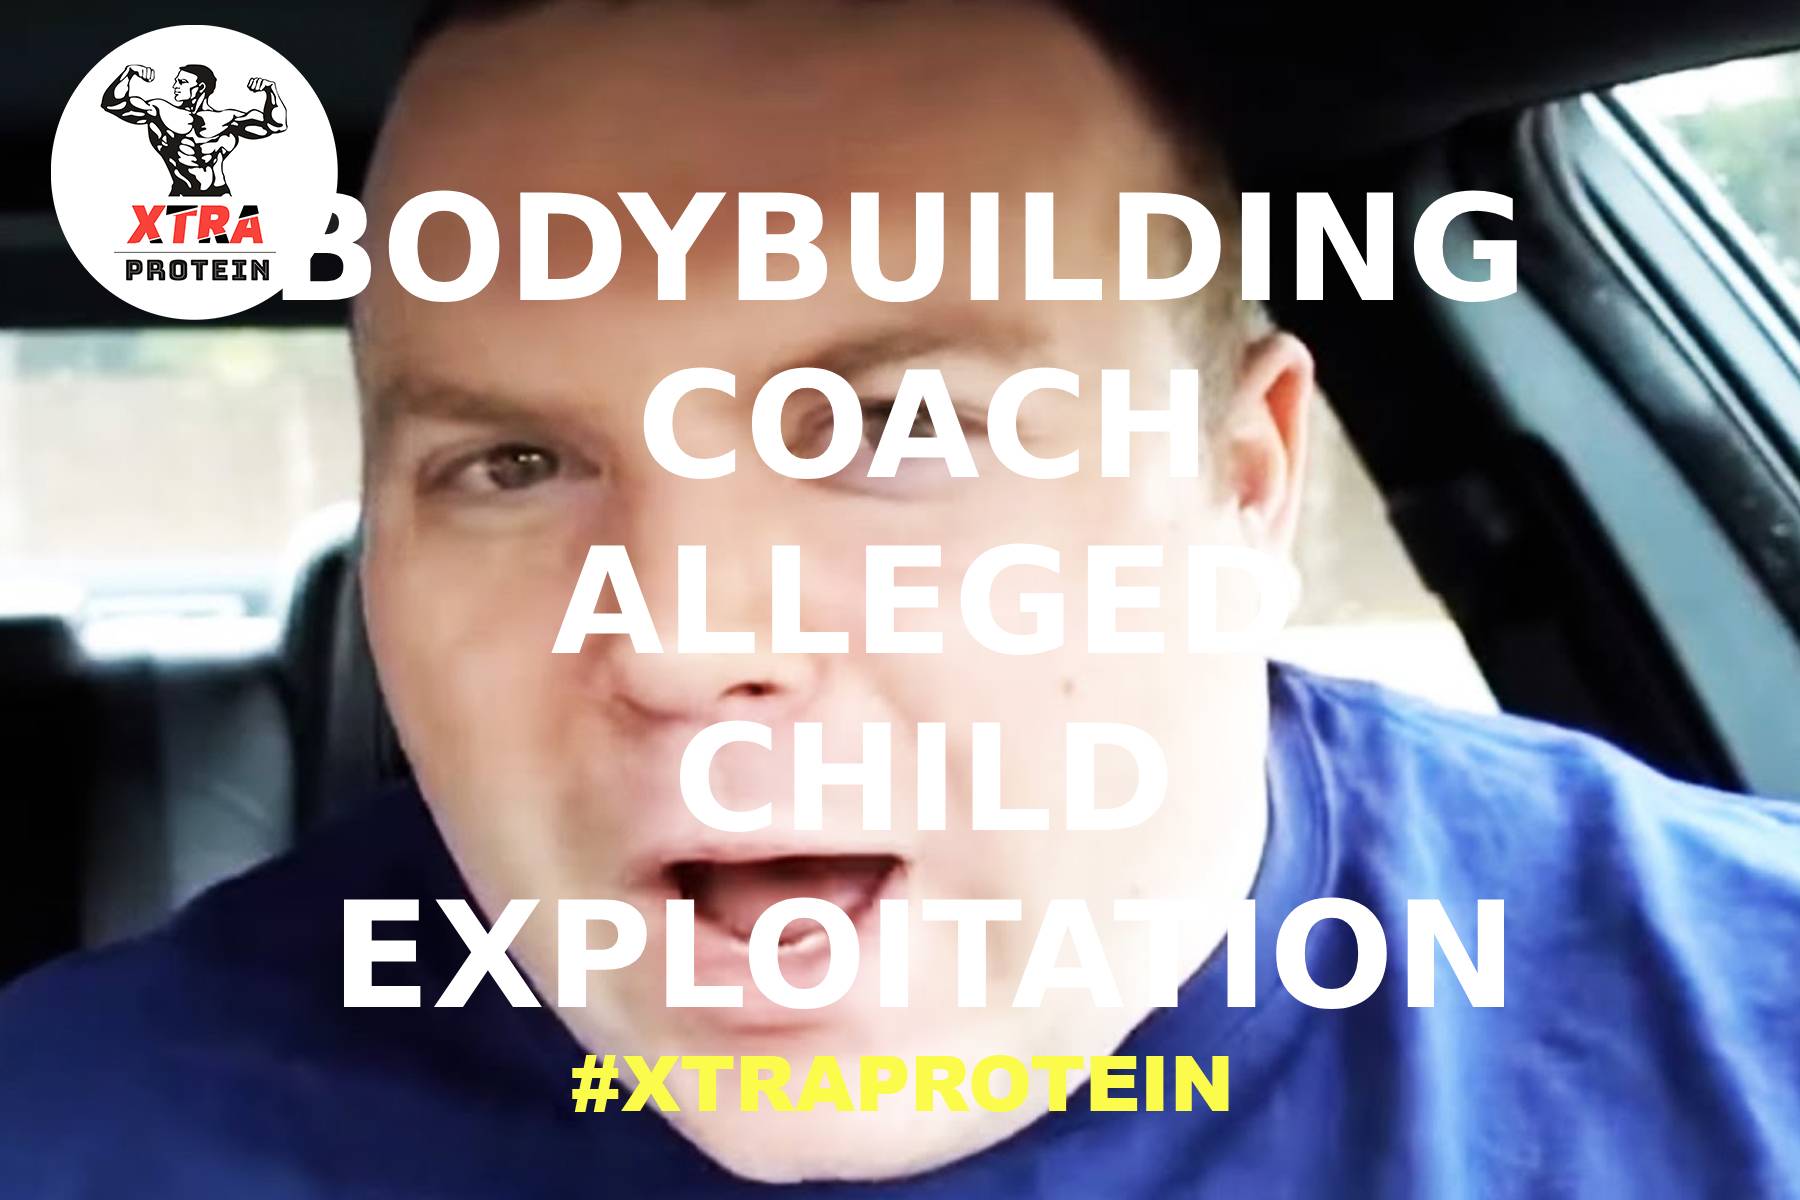 Bodybuilding Coach Faces Federal Indictment for Alleged Child Exploitation | Xtra Protein